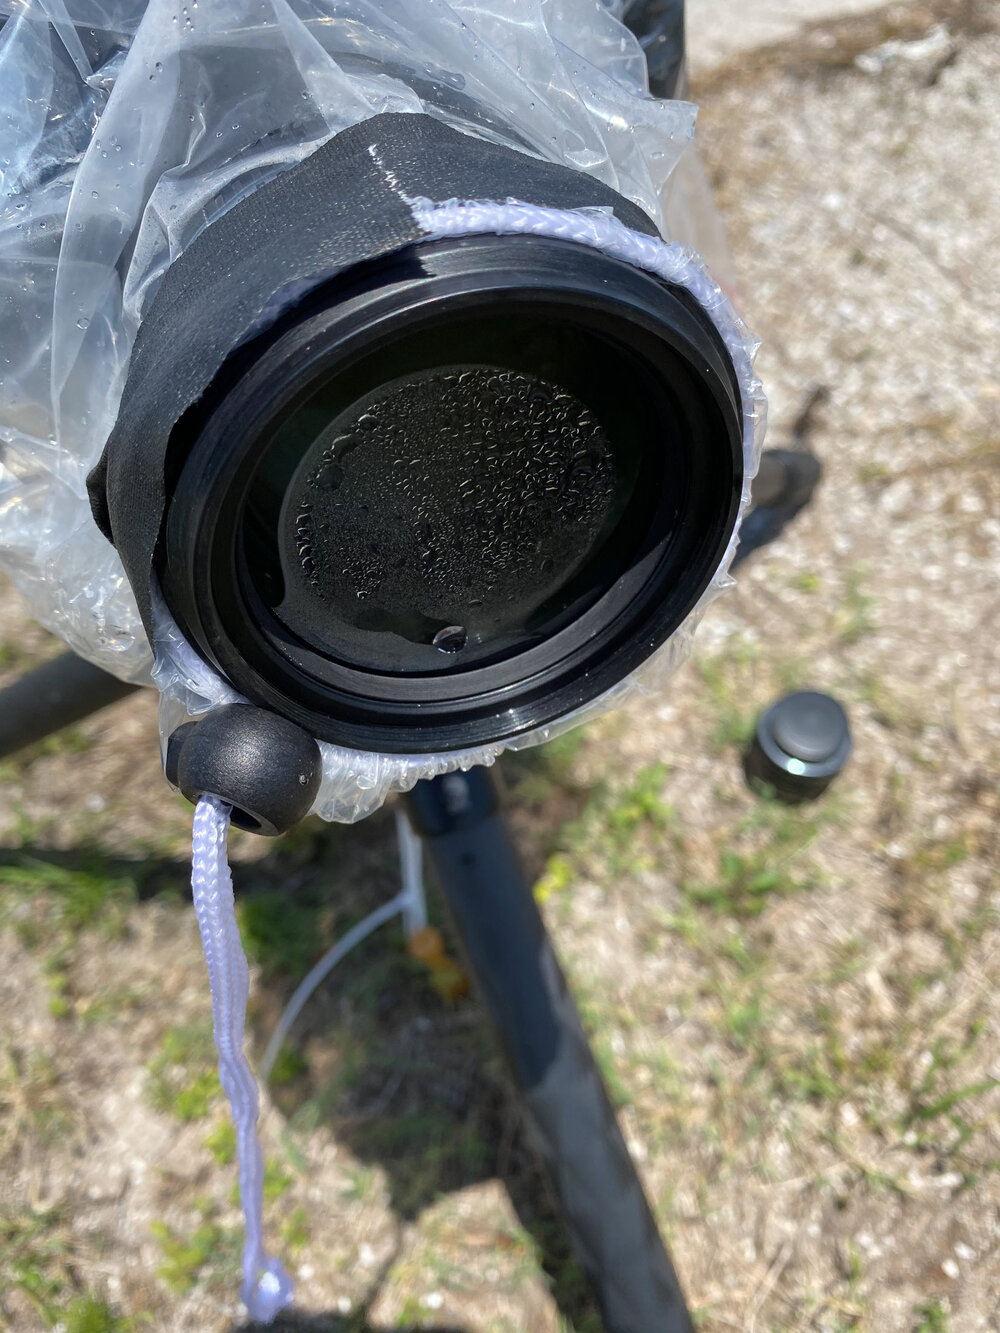 Repeated heavy rains and high humidity left significant condensation inside of some lenses.